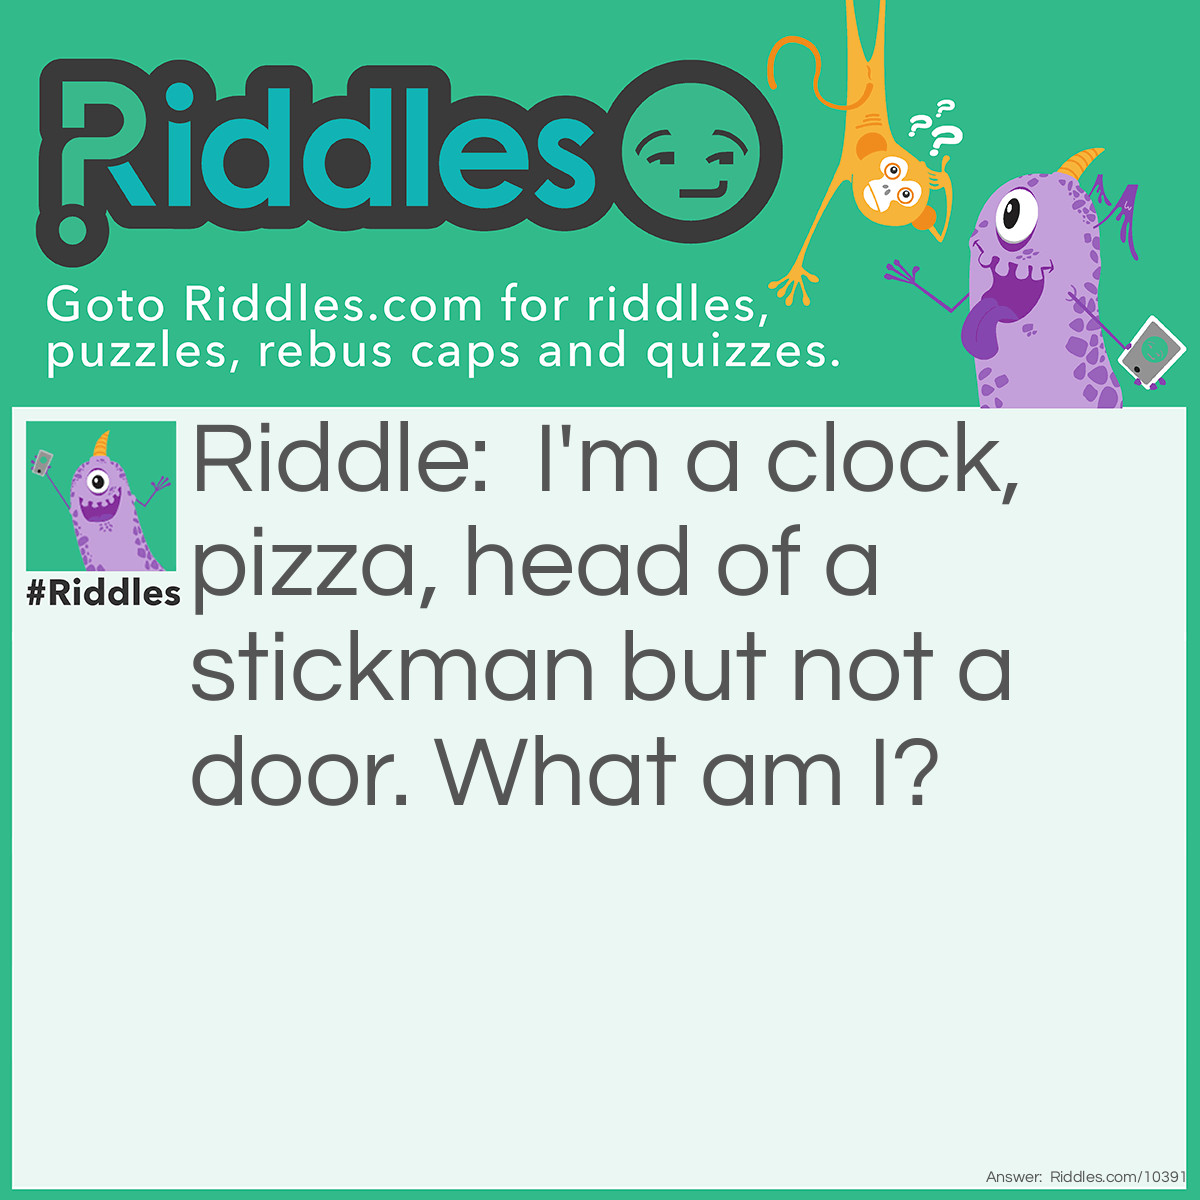 Riddle: I'm a clock, pizza, head of a stickman but not a door. What am I? Answer: A circle!